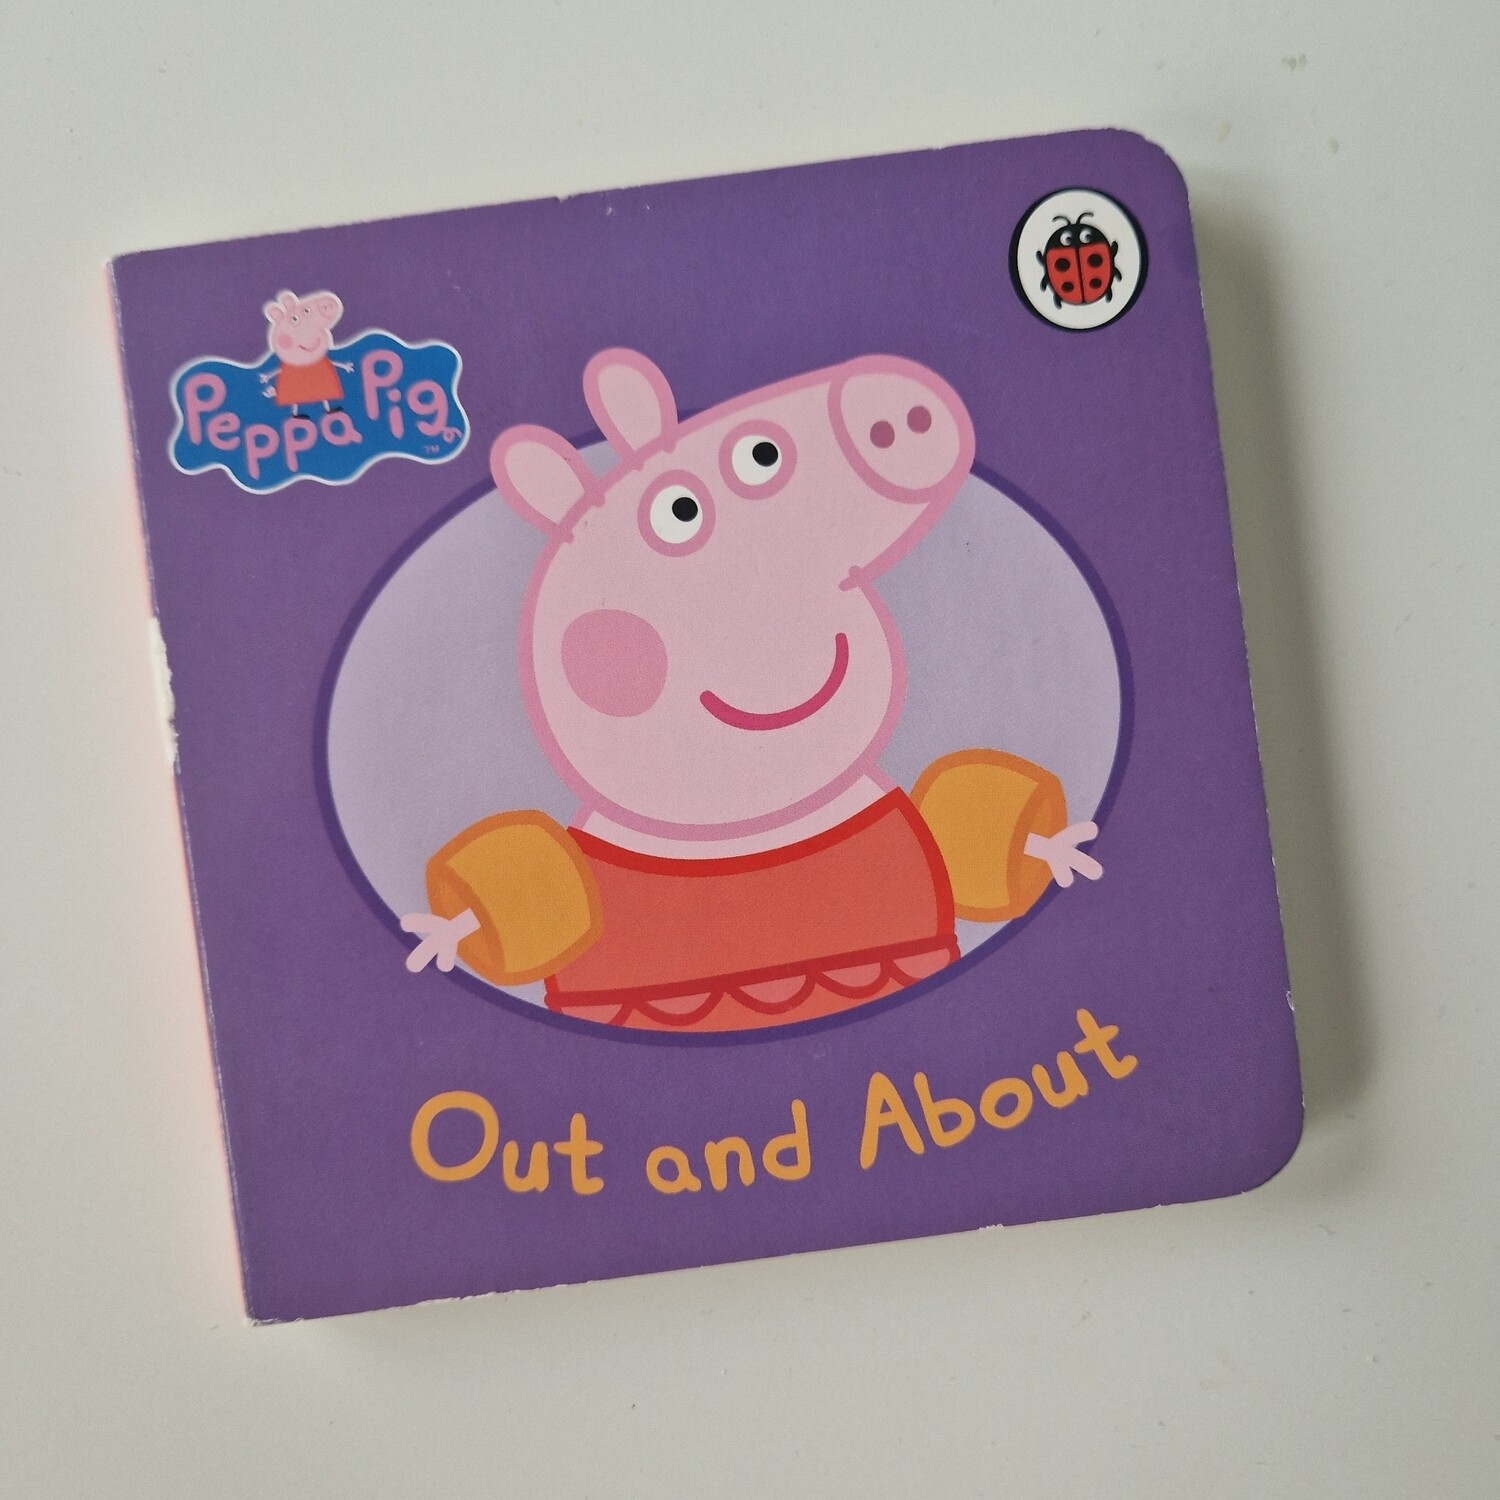 Peppa Pig - Out and About